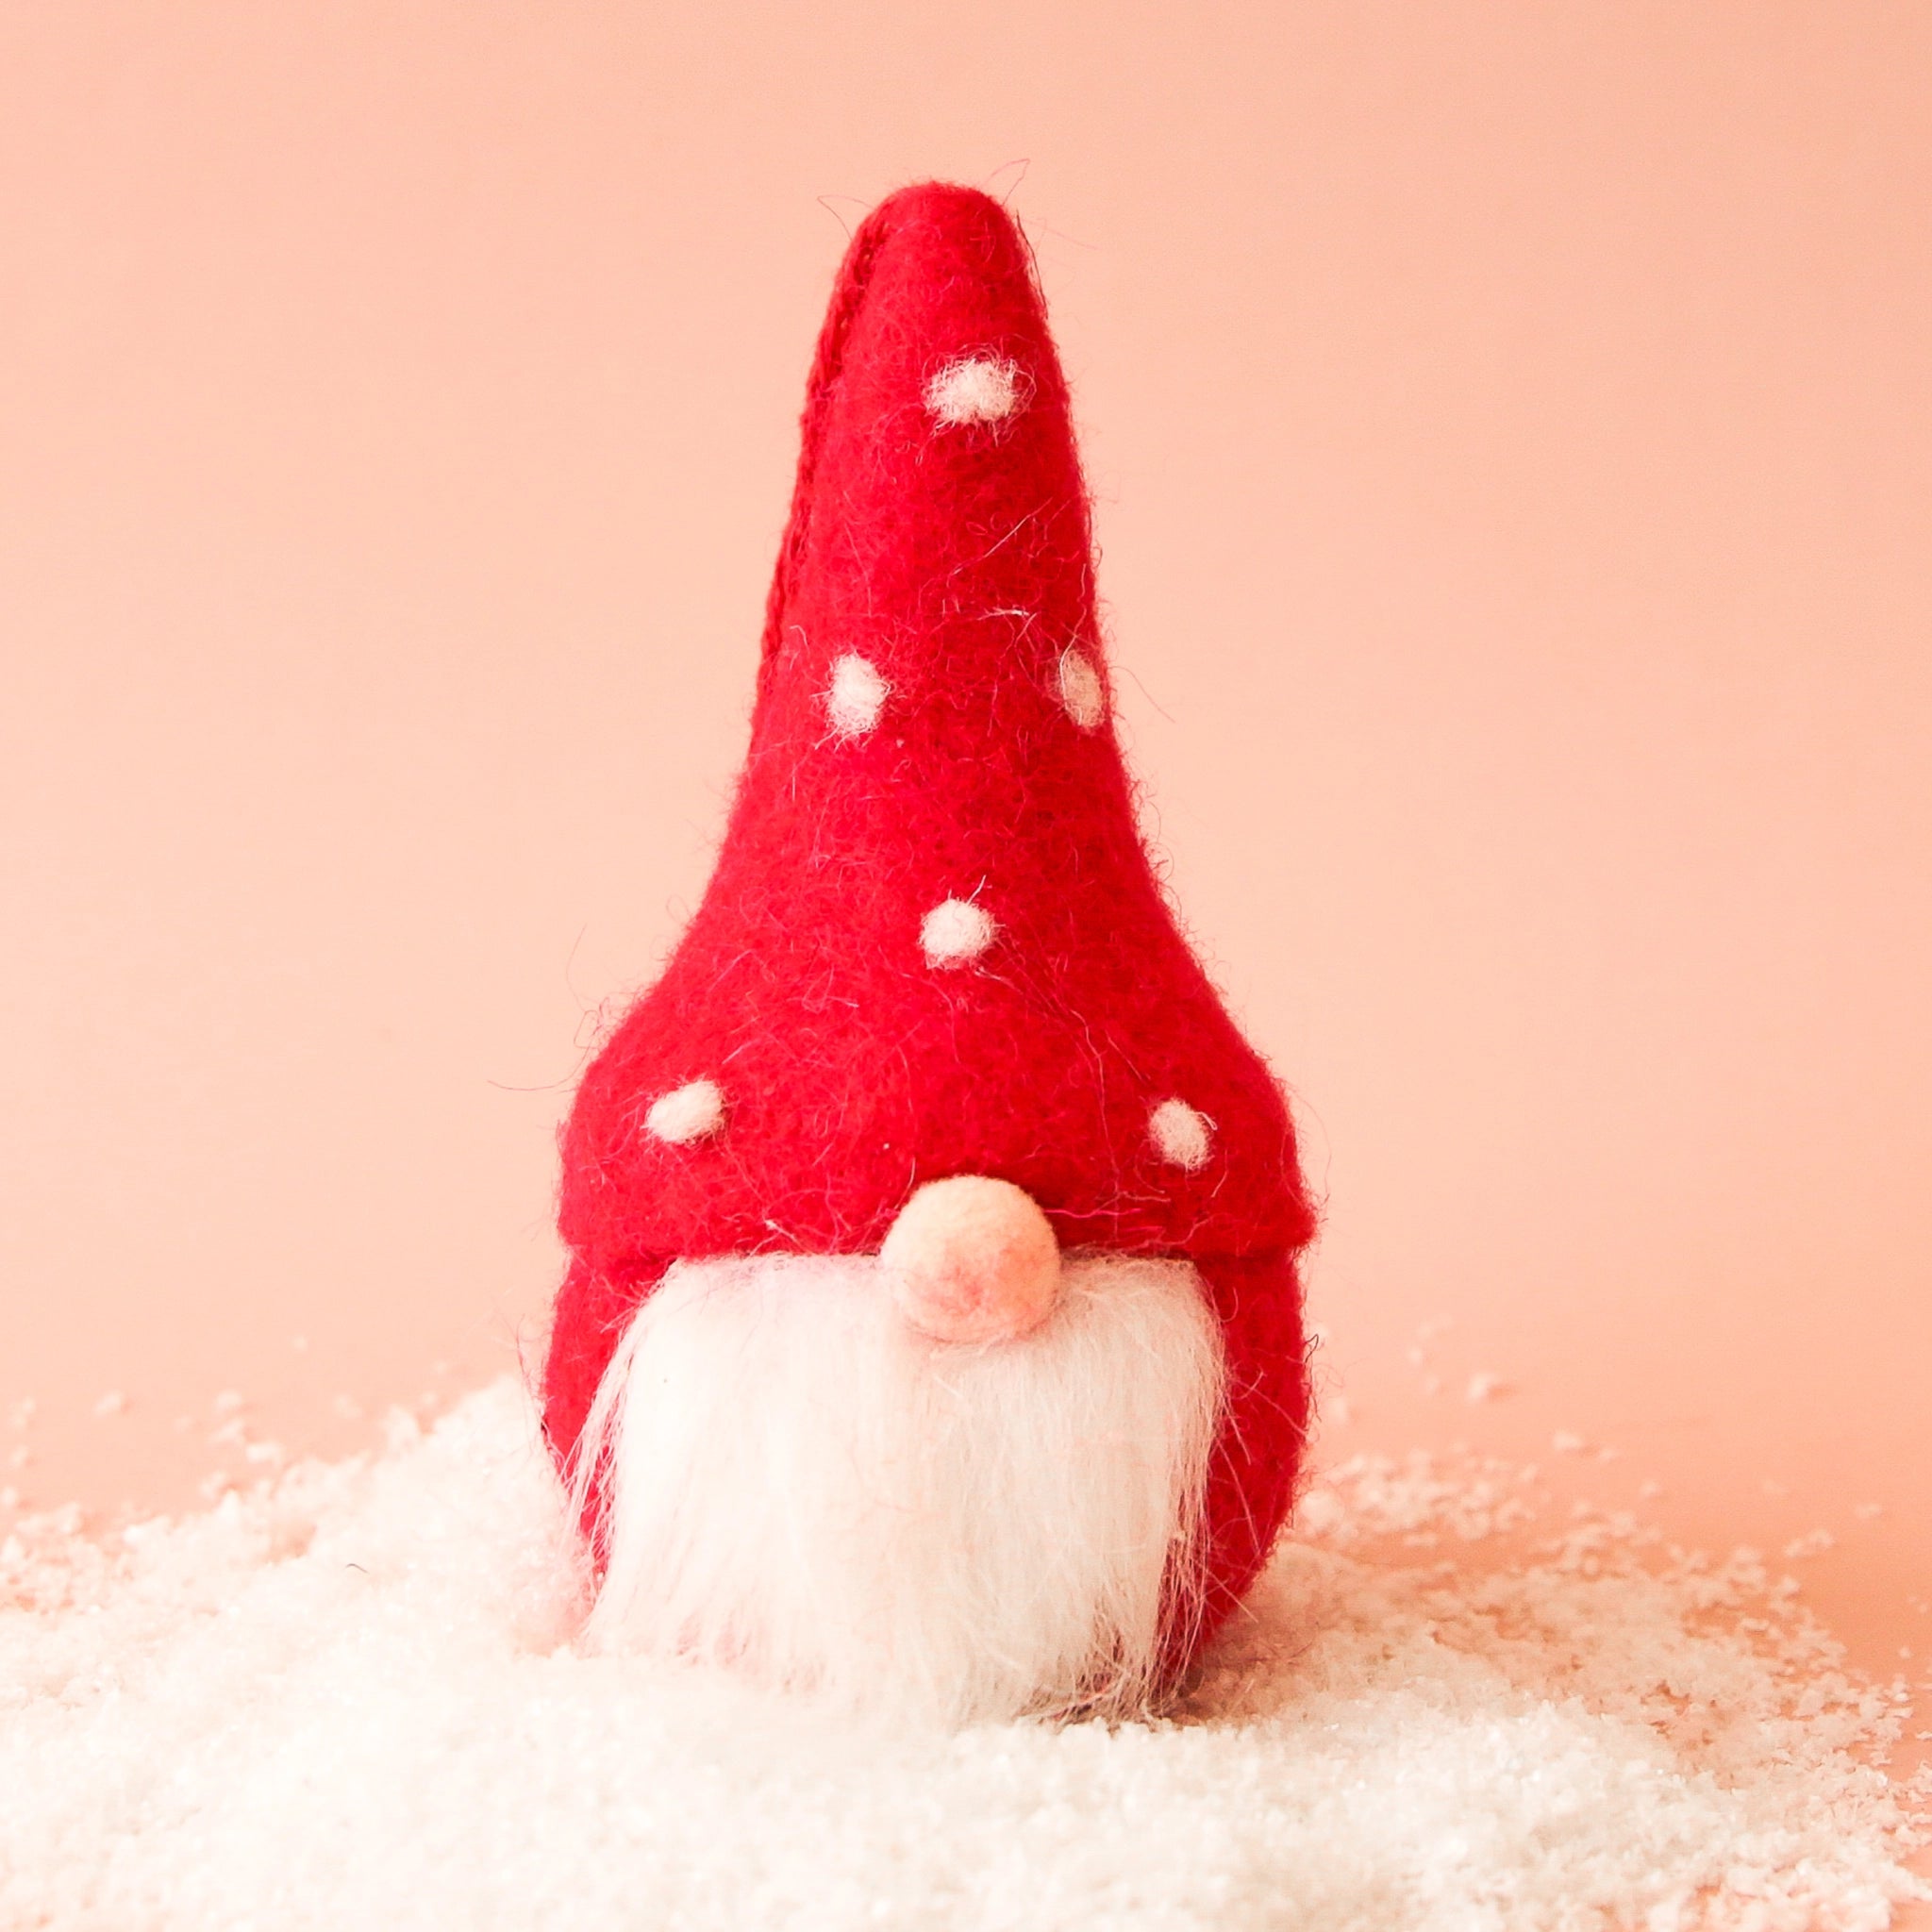 On a peachy background is a red gnome ornament with a white beard and white dots on its hat. 